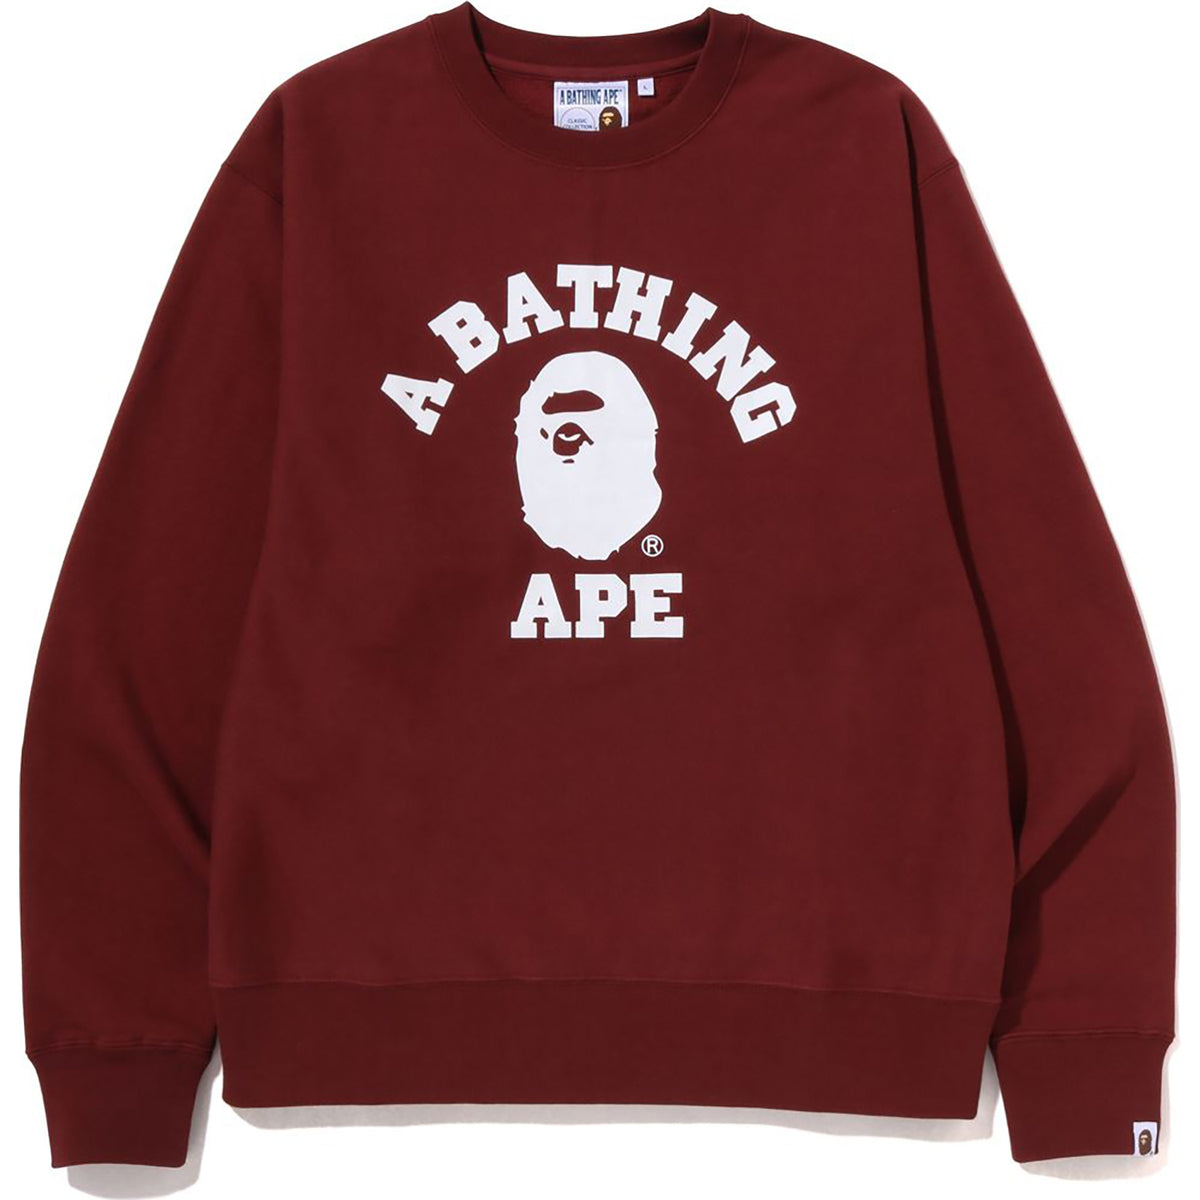 COLLEGE RELAXED FIT CREWNECK MENS